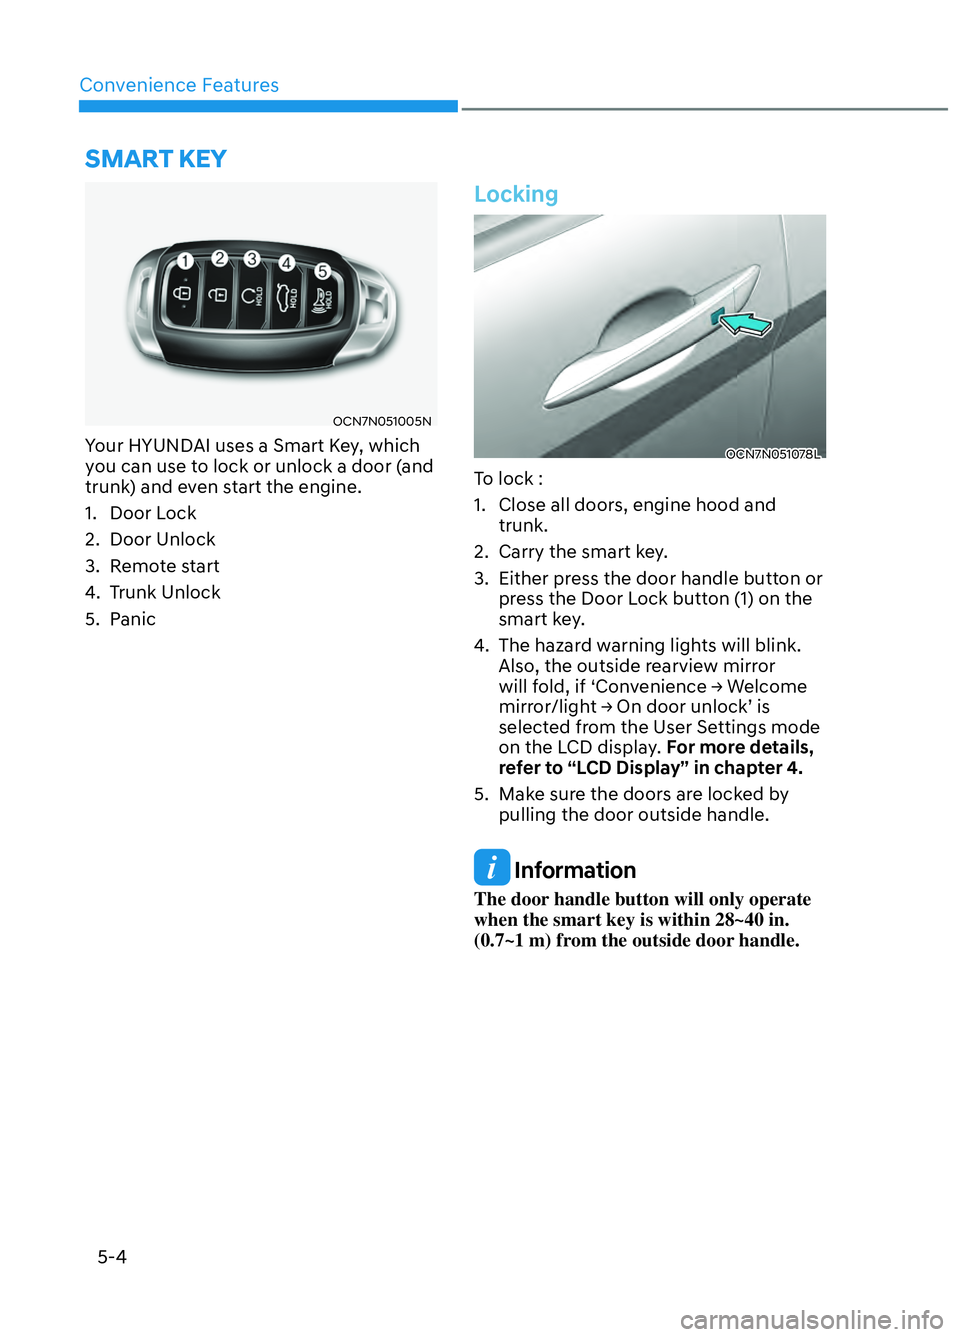 HYUNDAI ELANTRA N 2022  Owners Manual Convenience Features5-4
OCN7N051005NOCN7N051005N
Your HYUNDAI uses a Smart Key, which 
you can use to lock or unlock a door (and 
trunk) and even start the engine.
1. Door Lock
2. Door Unlock
3. Remot